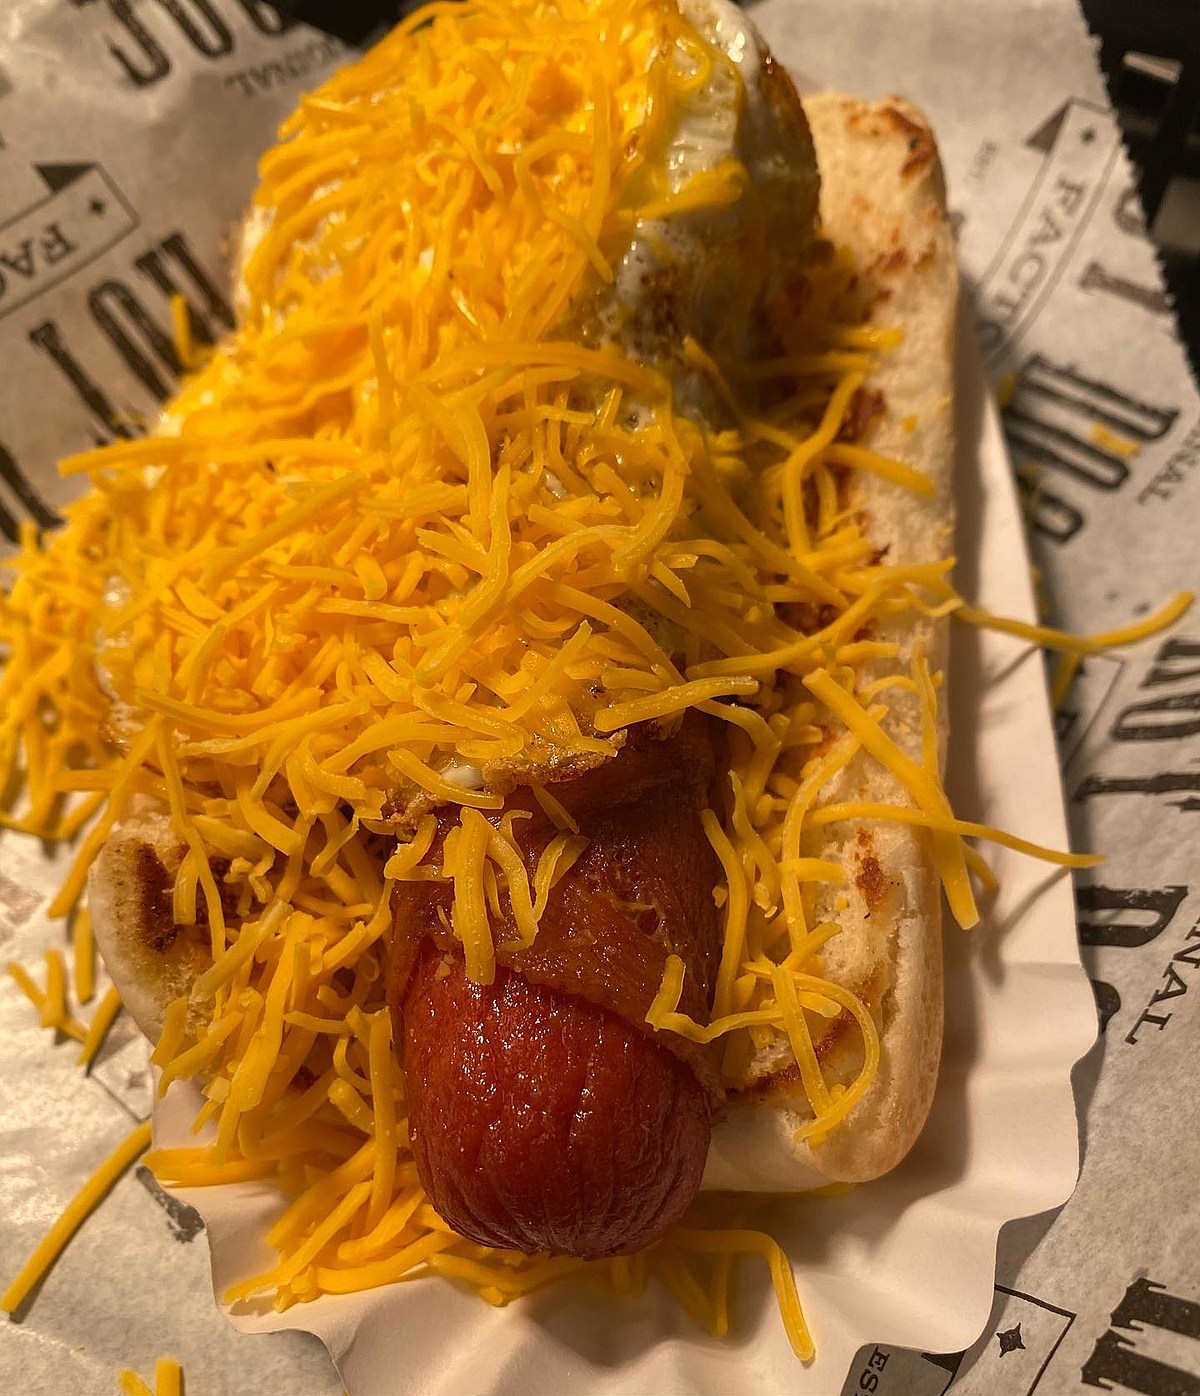 Royals roll out special and strange hot dog for Grateful Dead Day